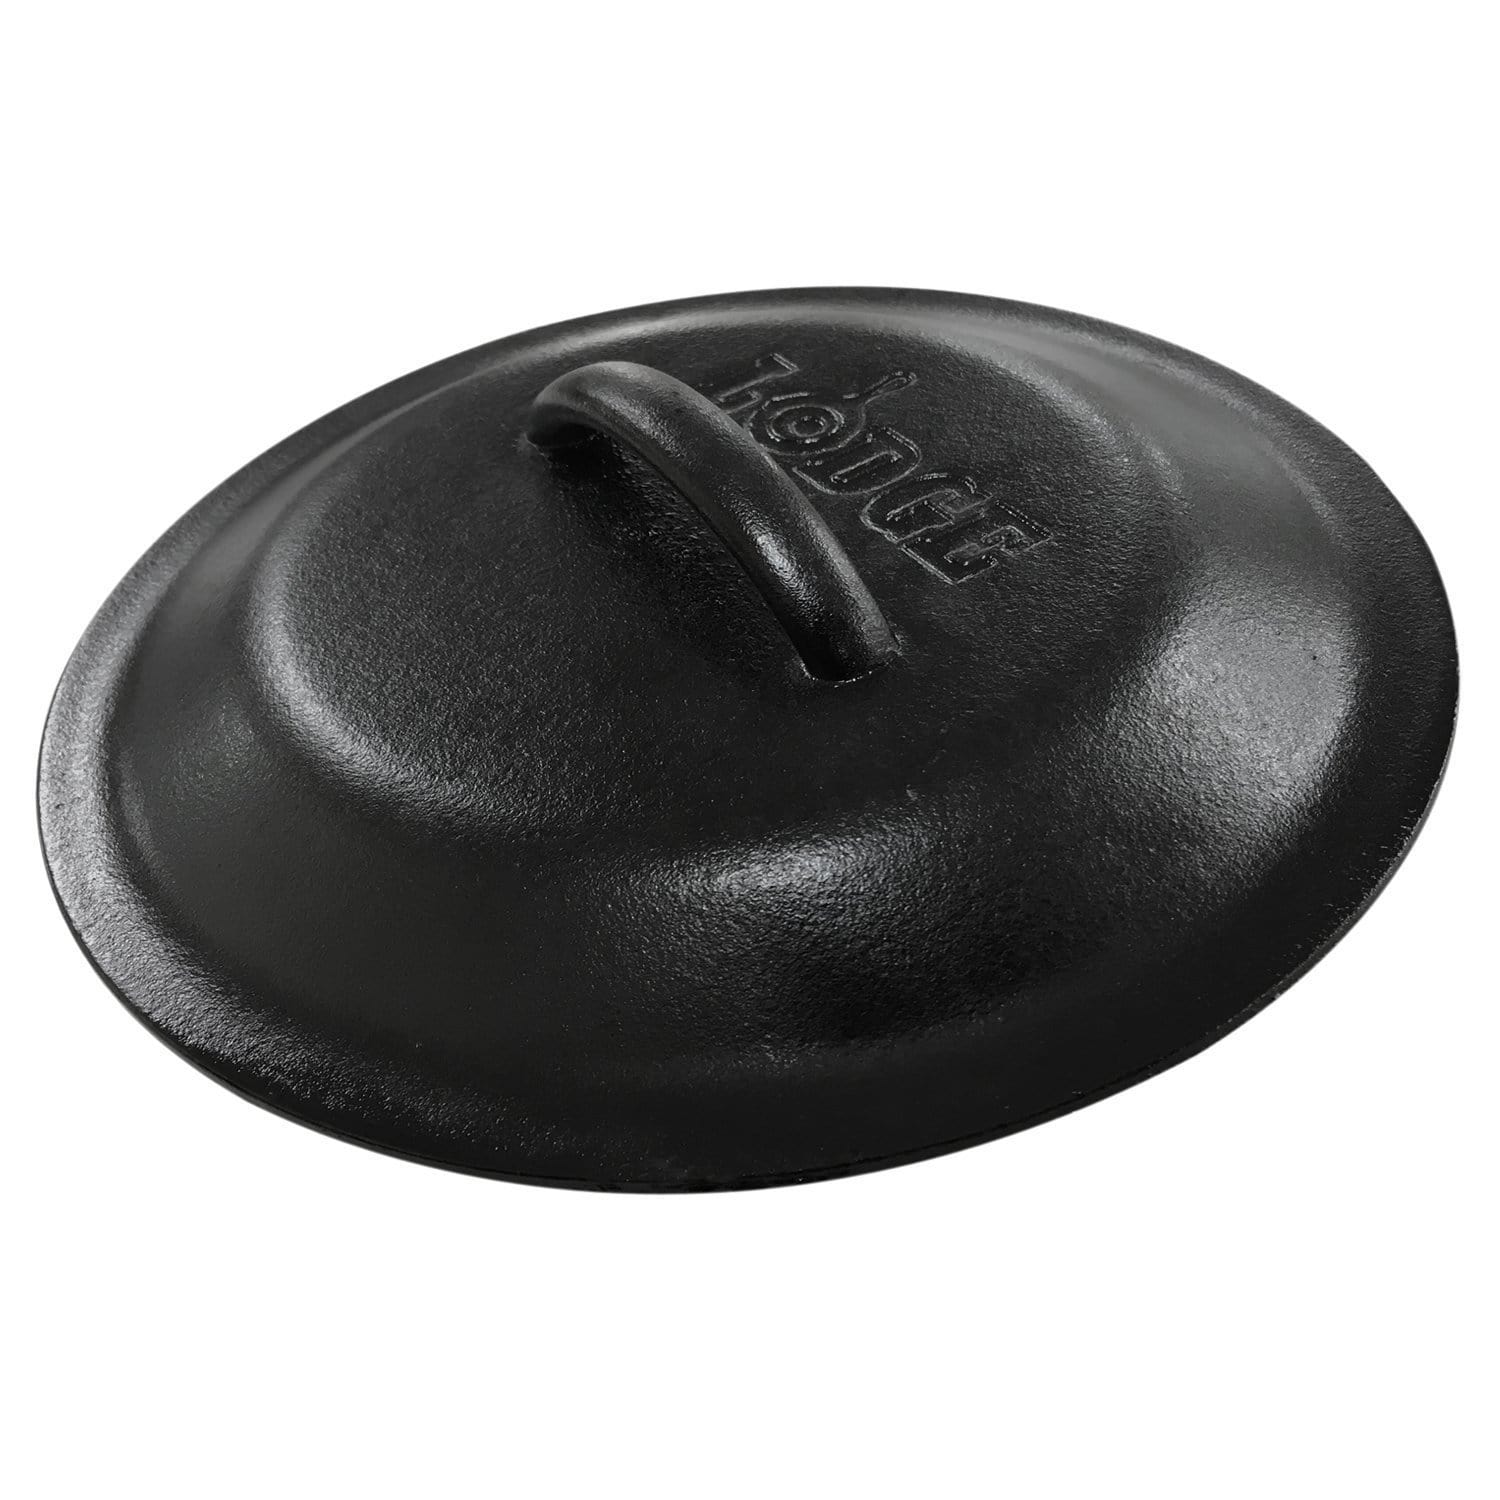 Lodge Cast Iron Camping & Outdoor : Cooking Lodge 10 1 4in Cast Iron Lid